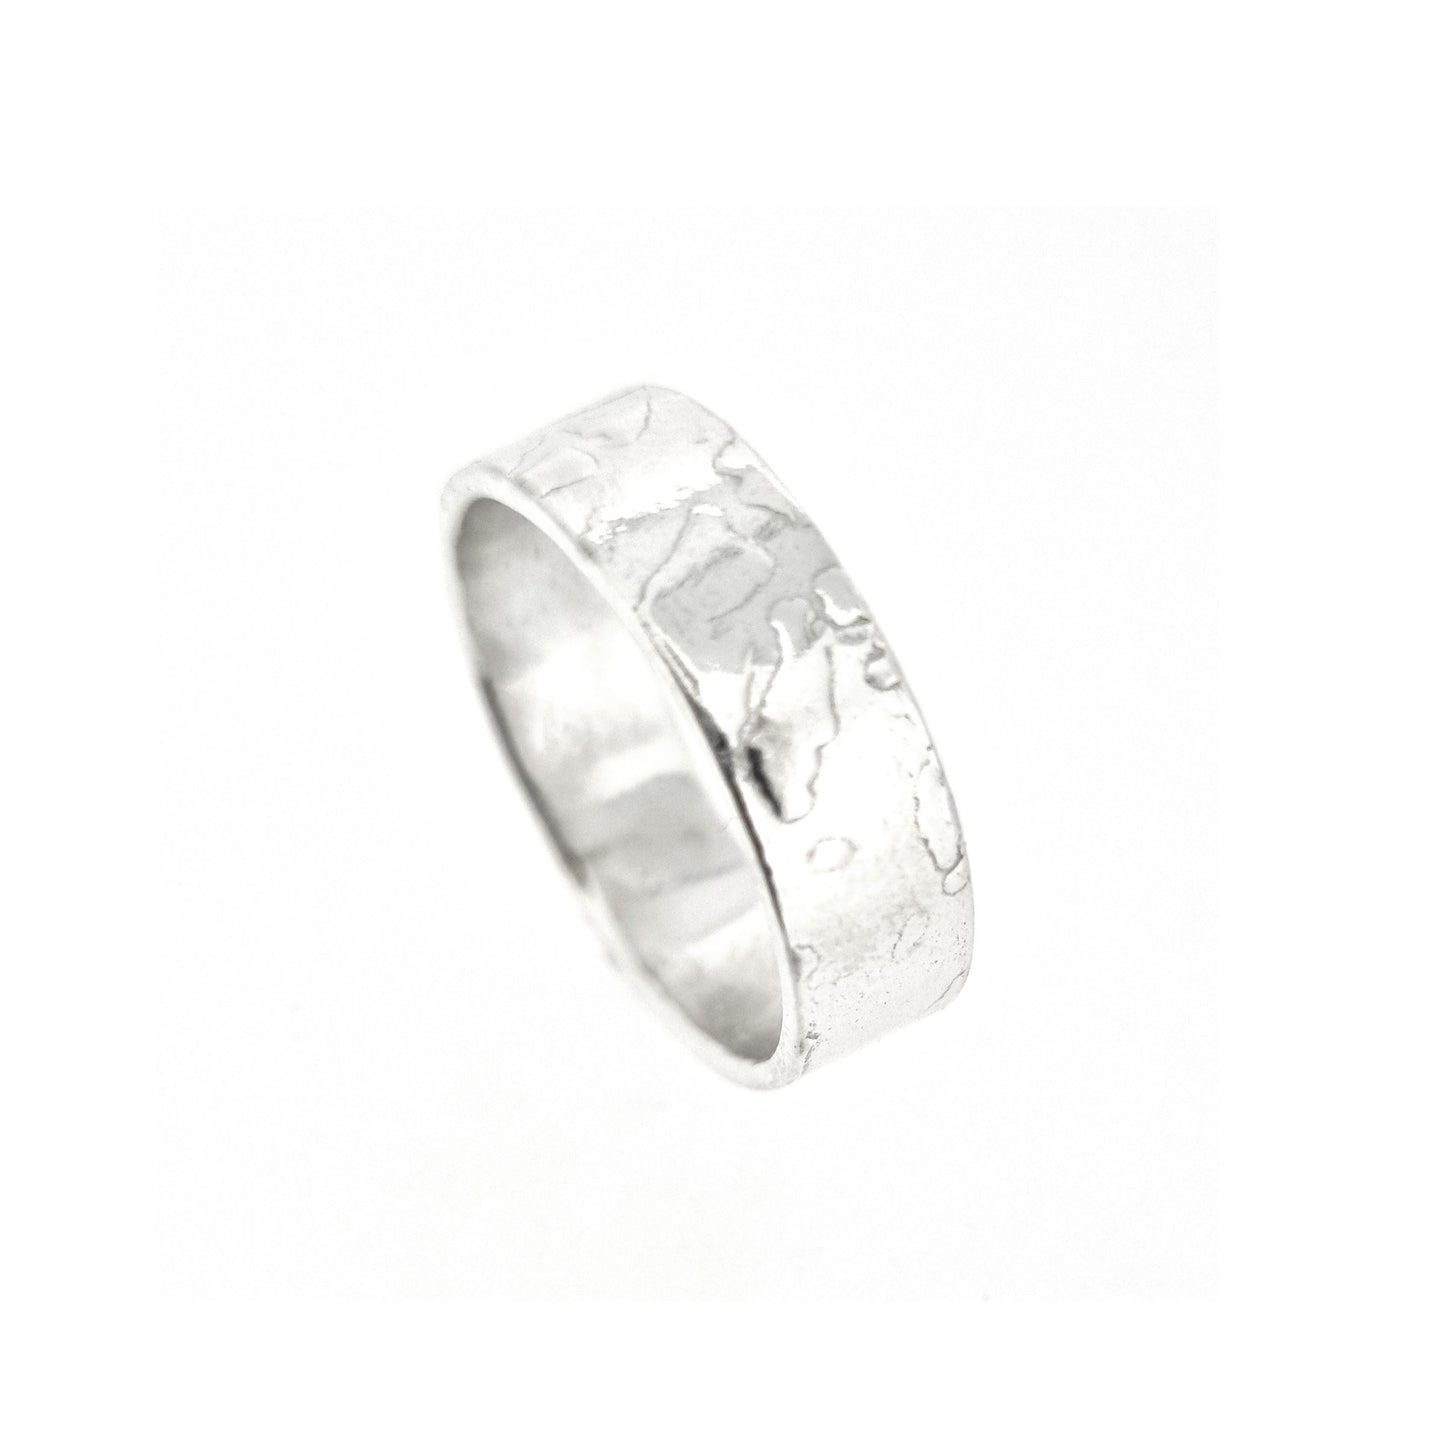 Silver band ring with islands in the sea style pattern.